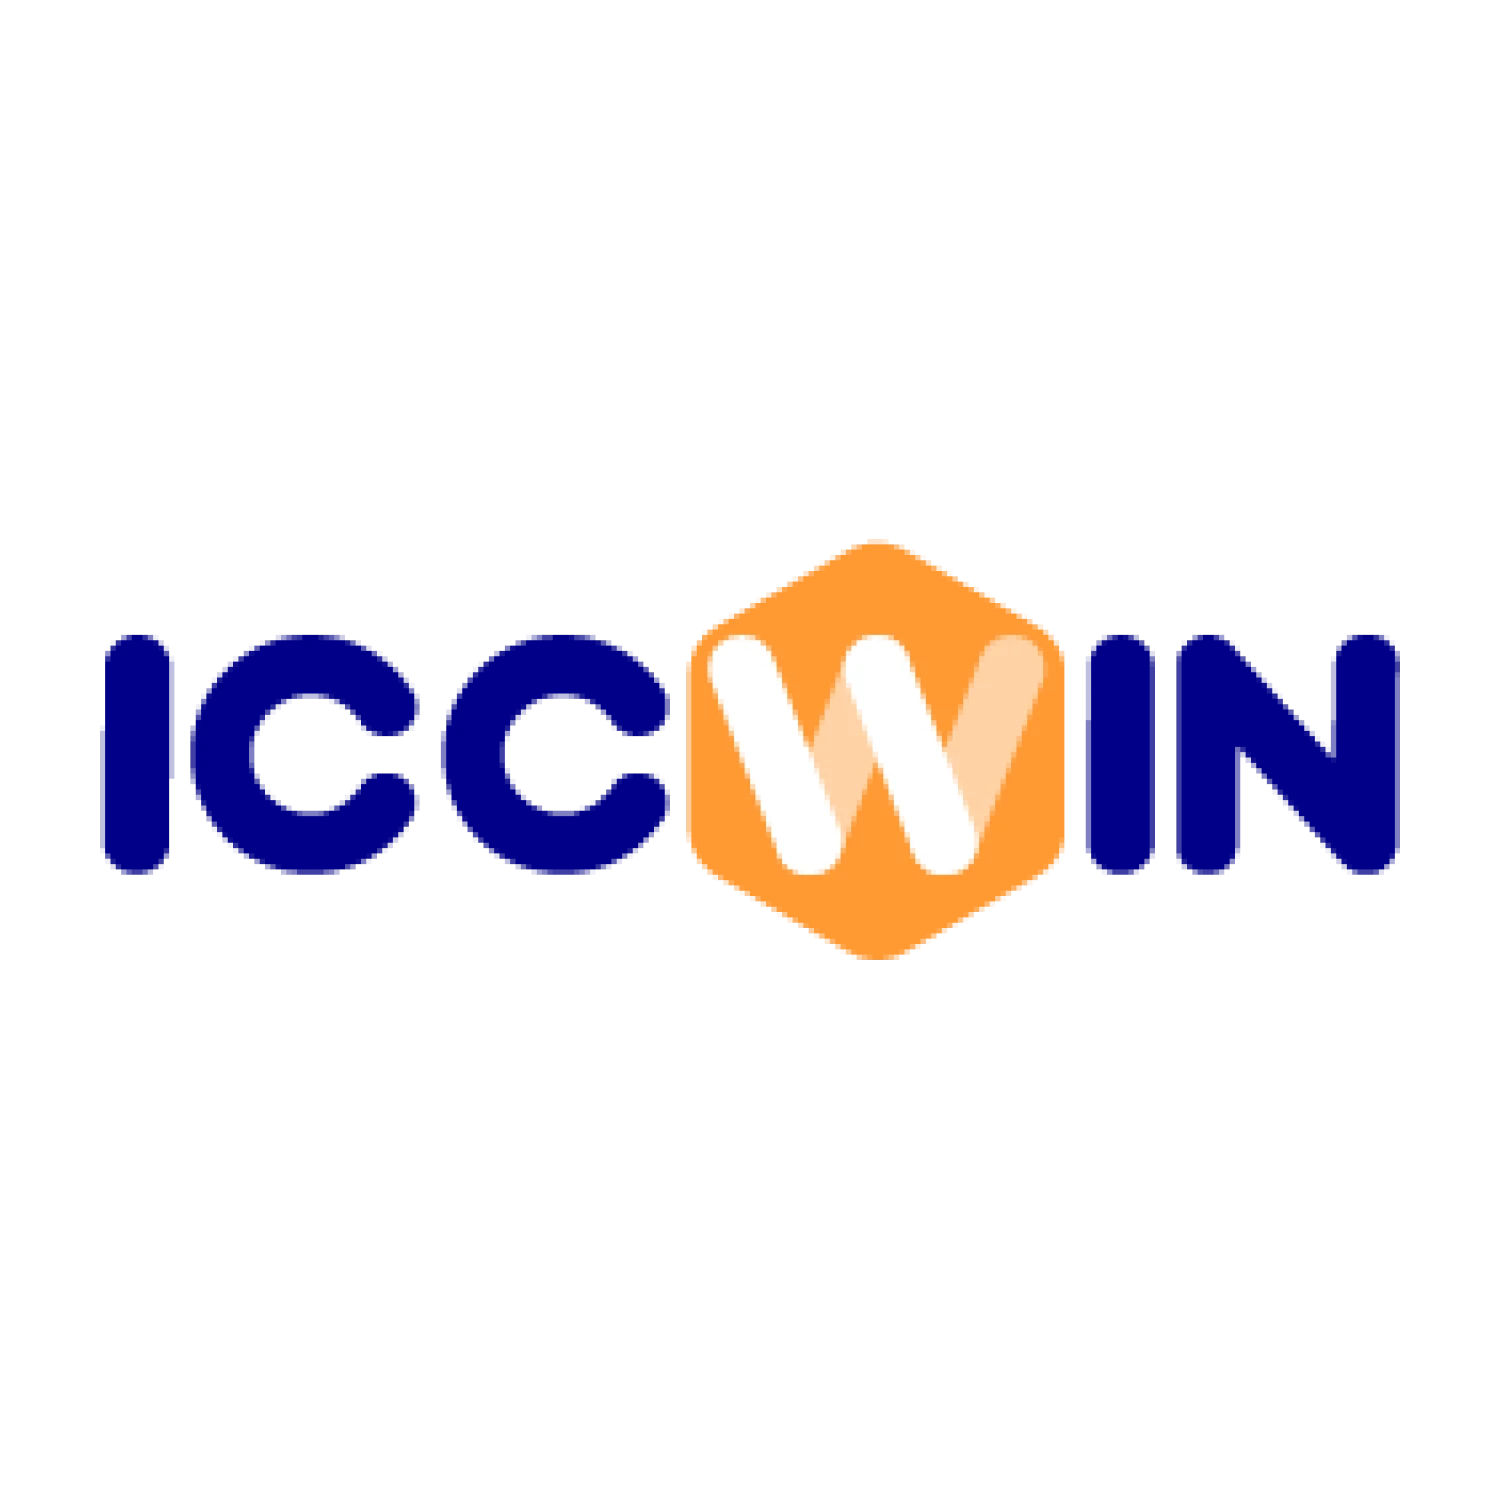 Learn about betting on ICCWIN from India.